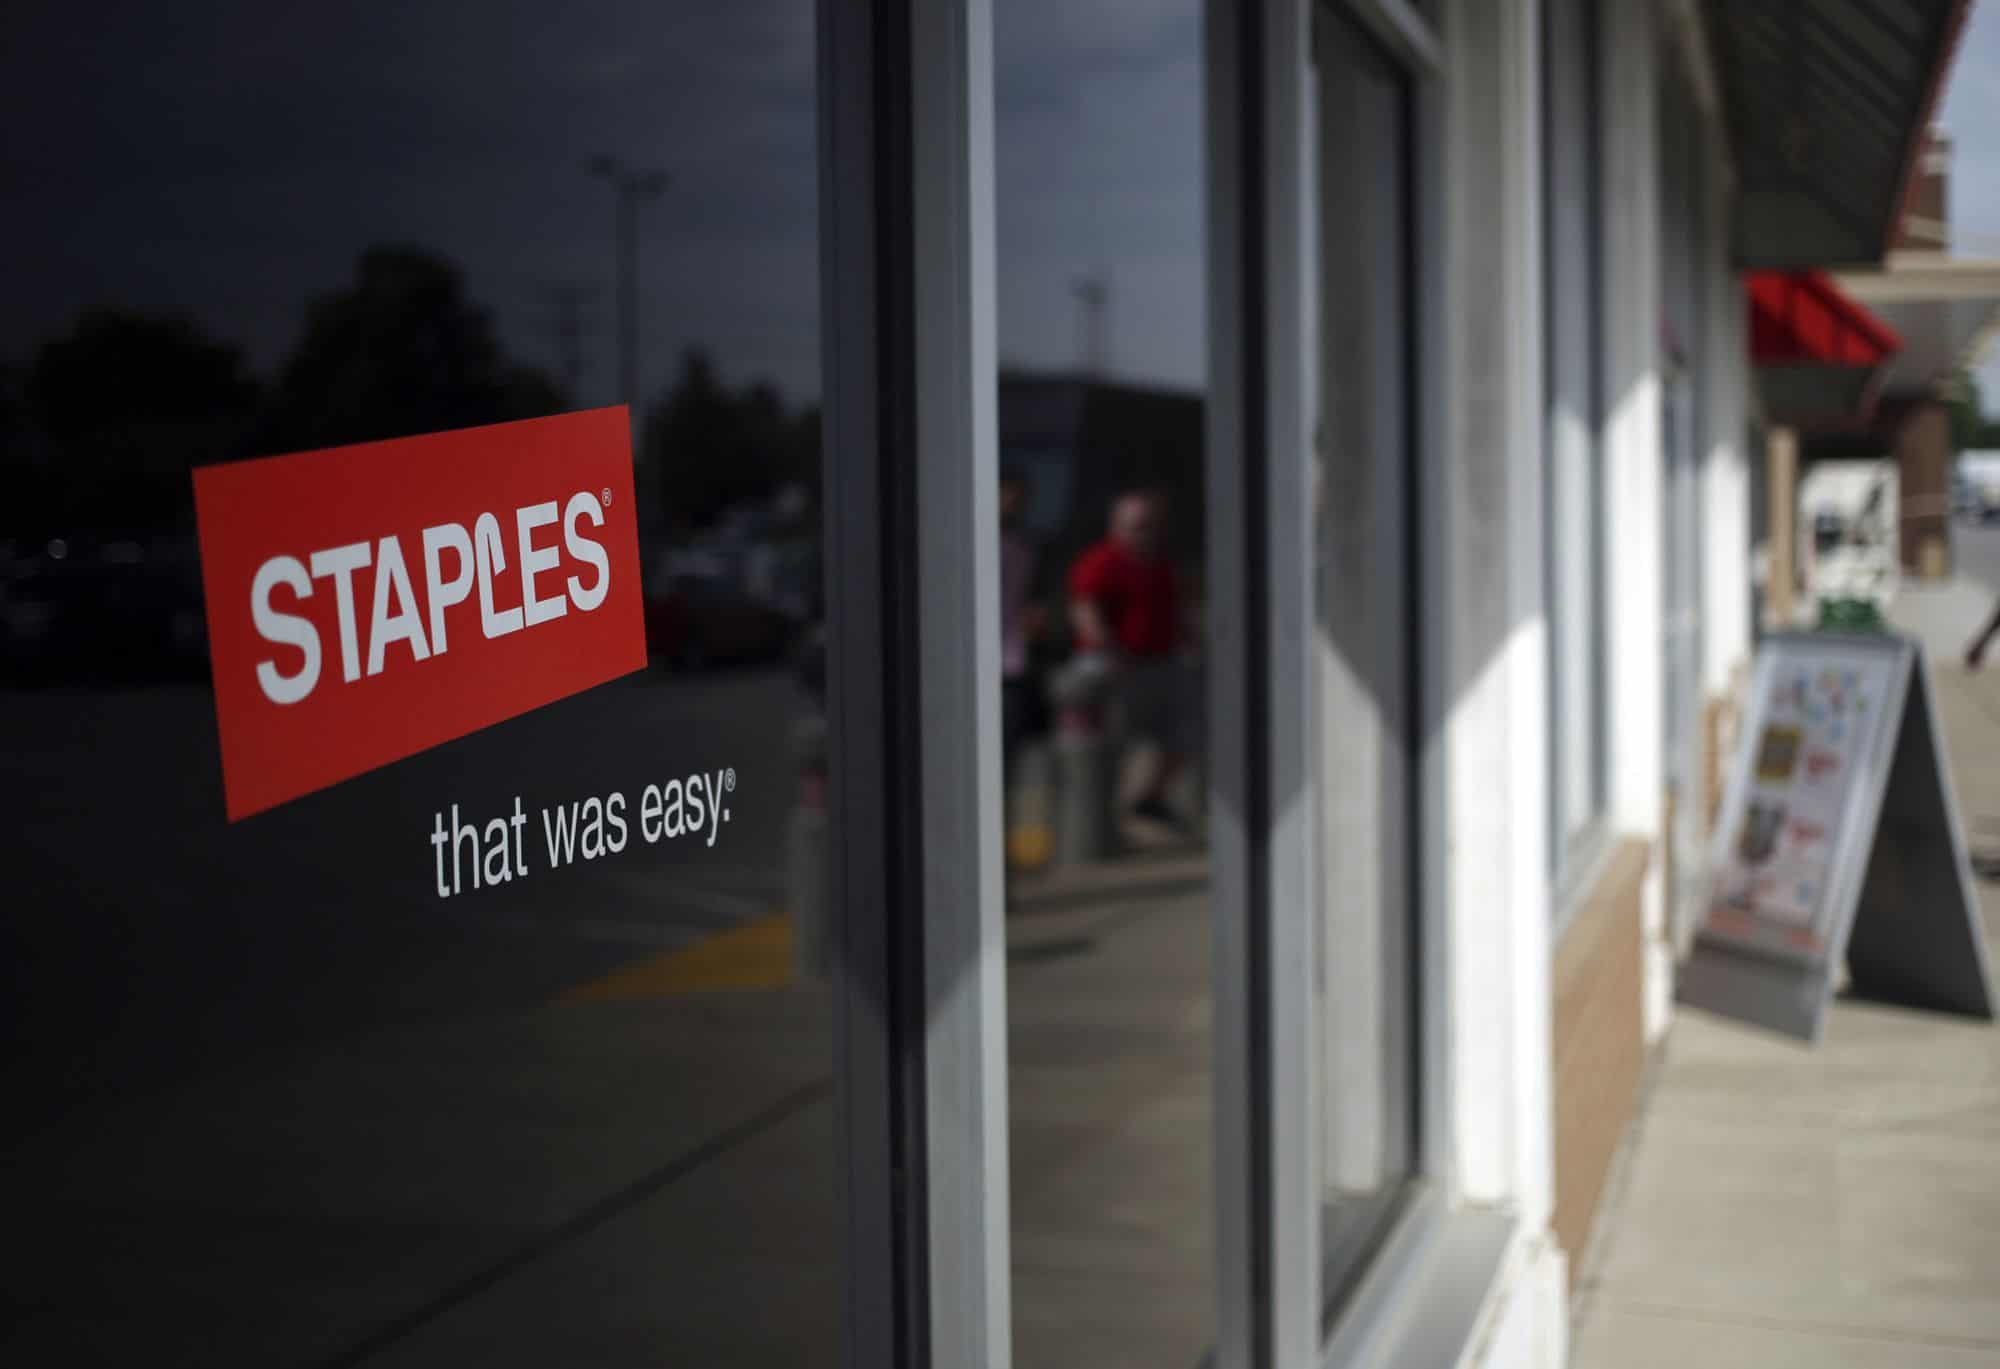 Sycamore set to take $1B out of Staples